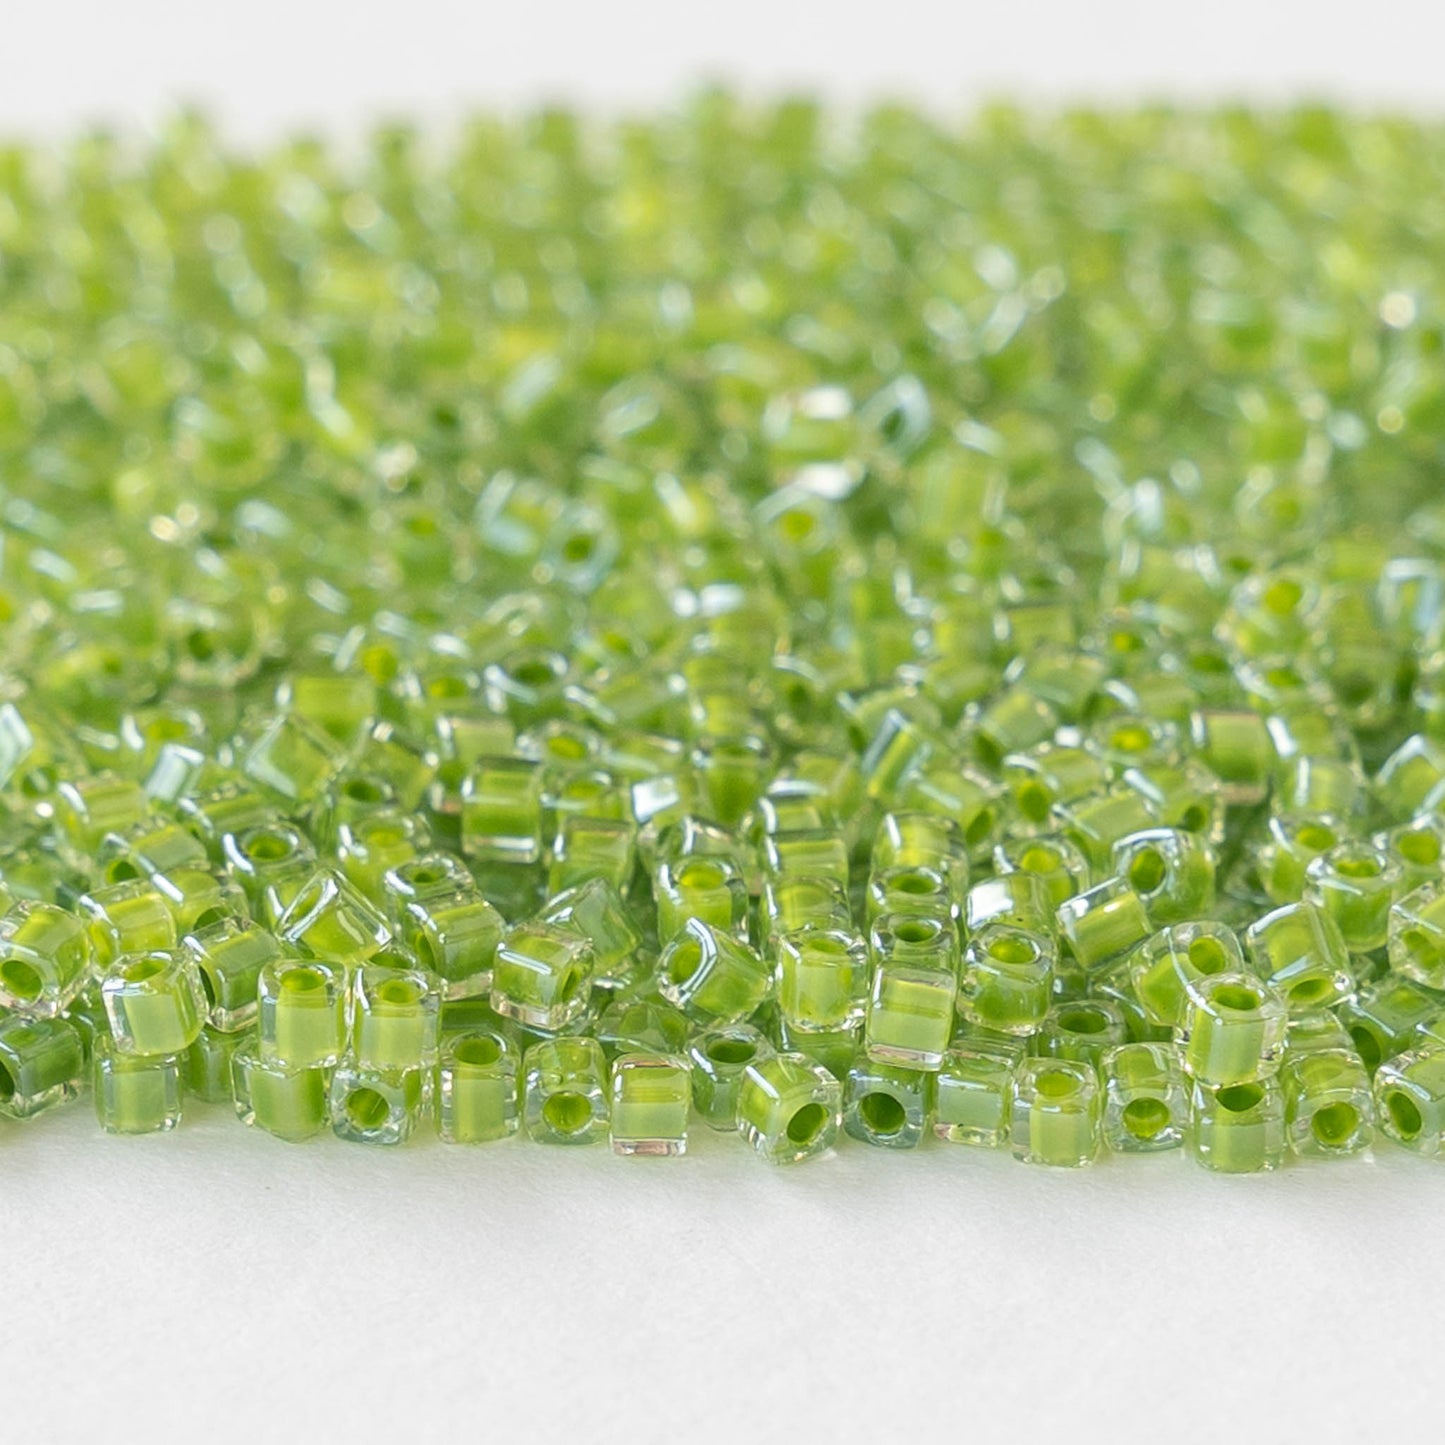 8mm Round Glass Beads - Opaque Matte Green Turquoise- 25 Beads –  funkyprettybeads